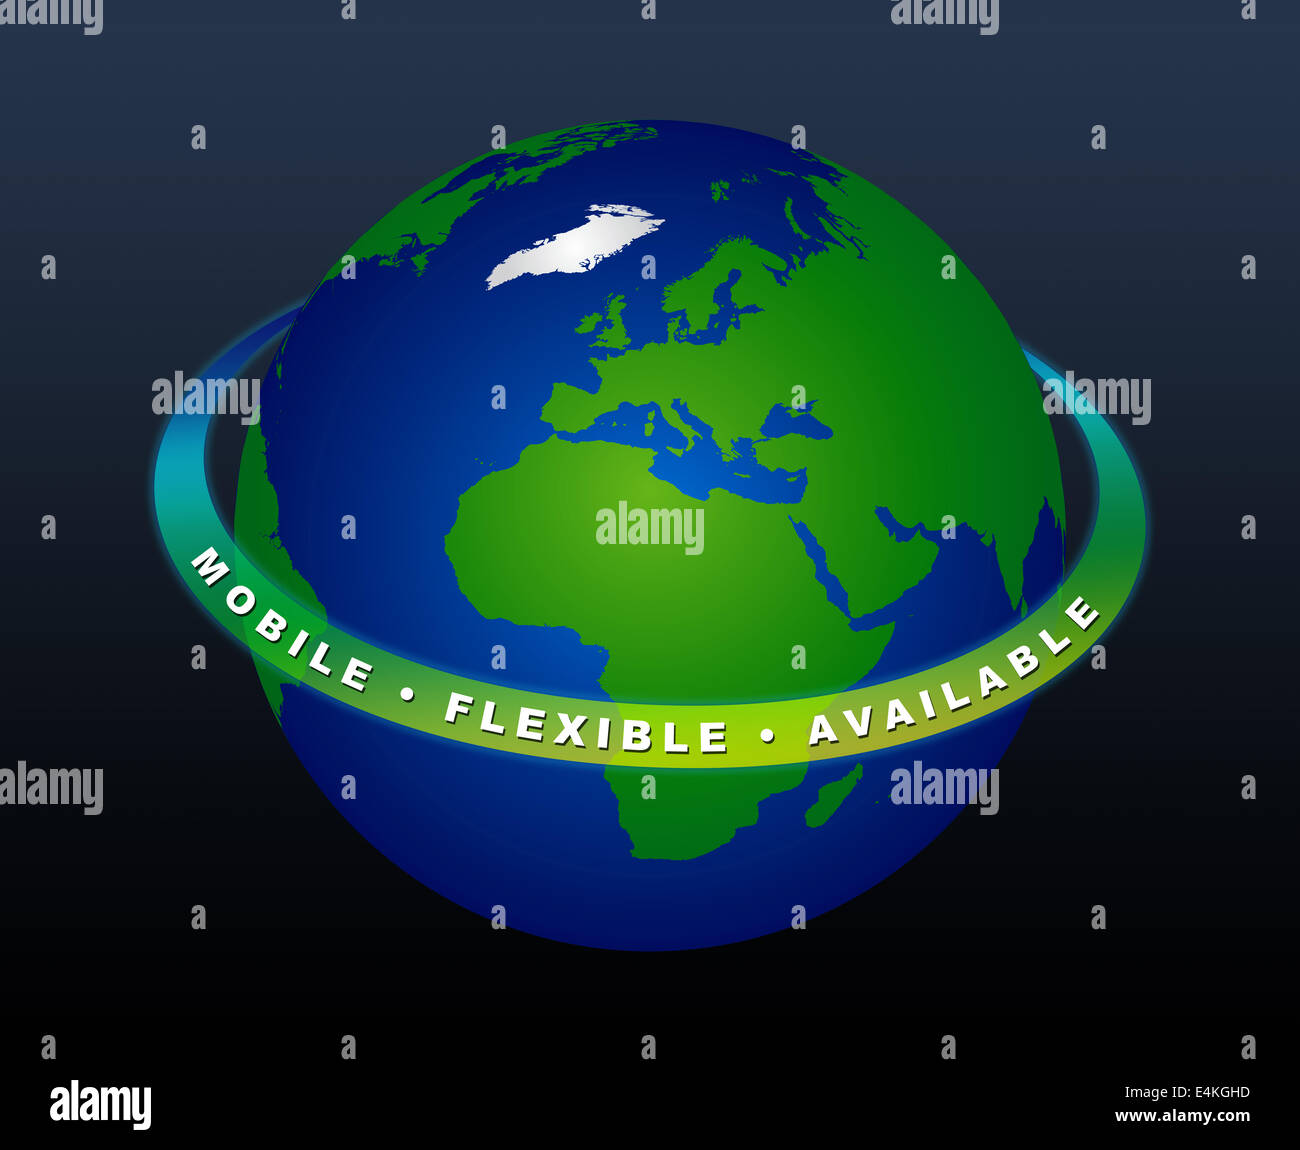 Planet Earth - MOBILE FLEXIBLE AVAILABLE Stock Photo